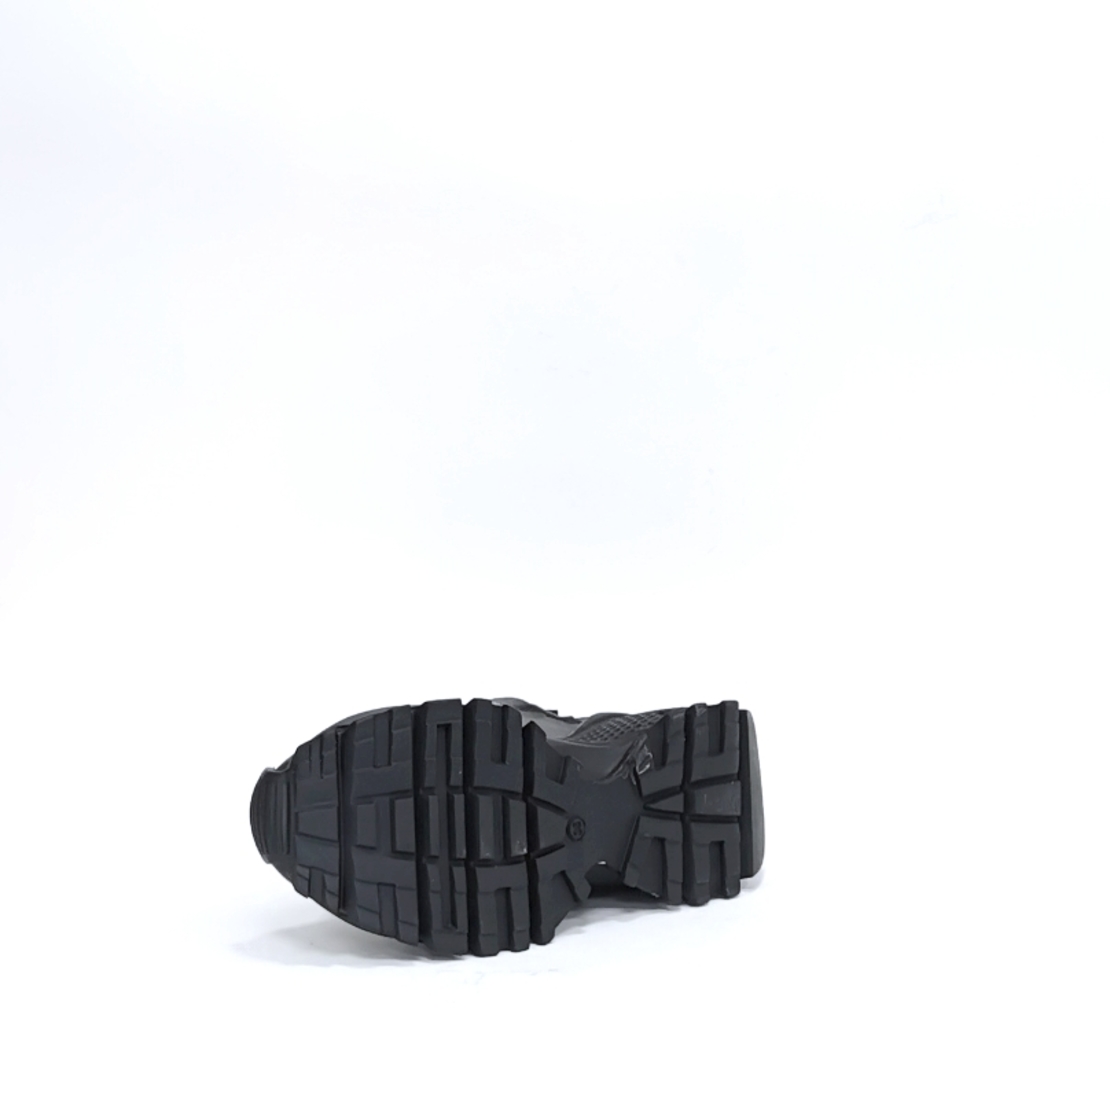 Women's sneaker made of natural leather in black color with anatomical insole/73367